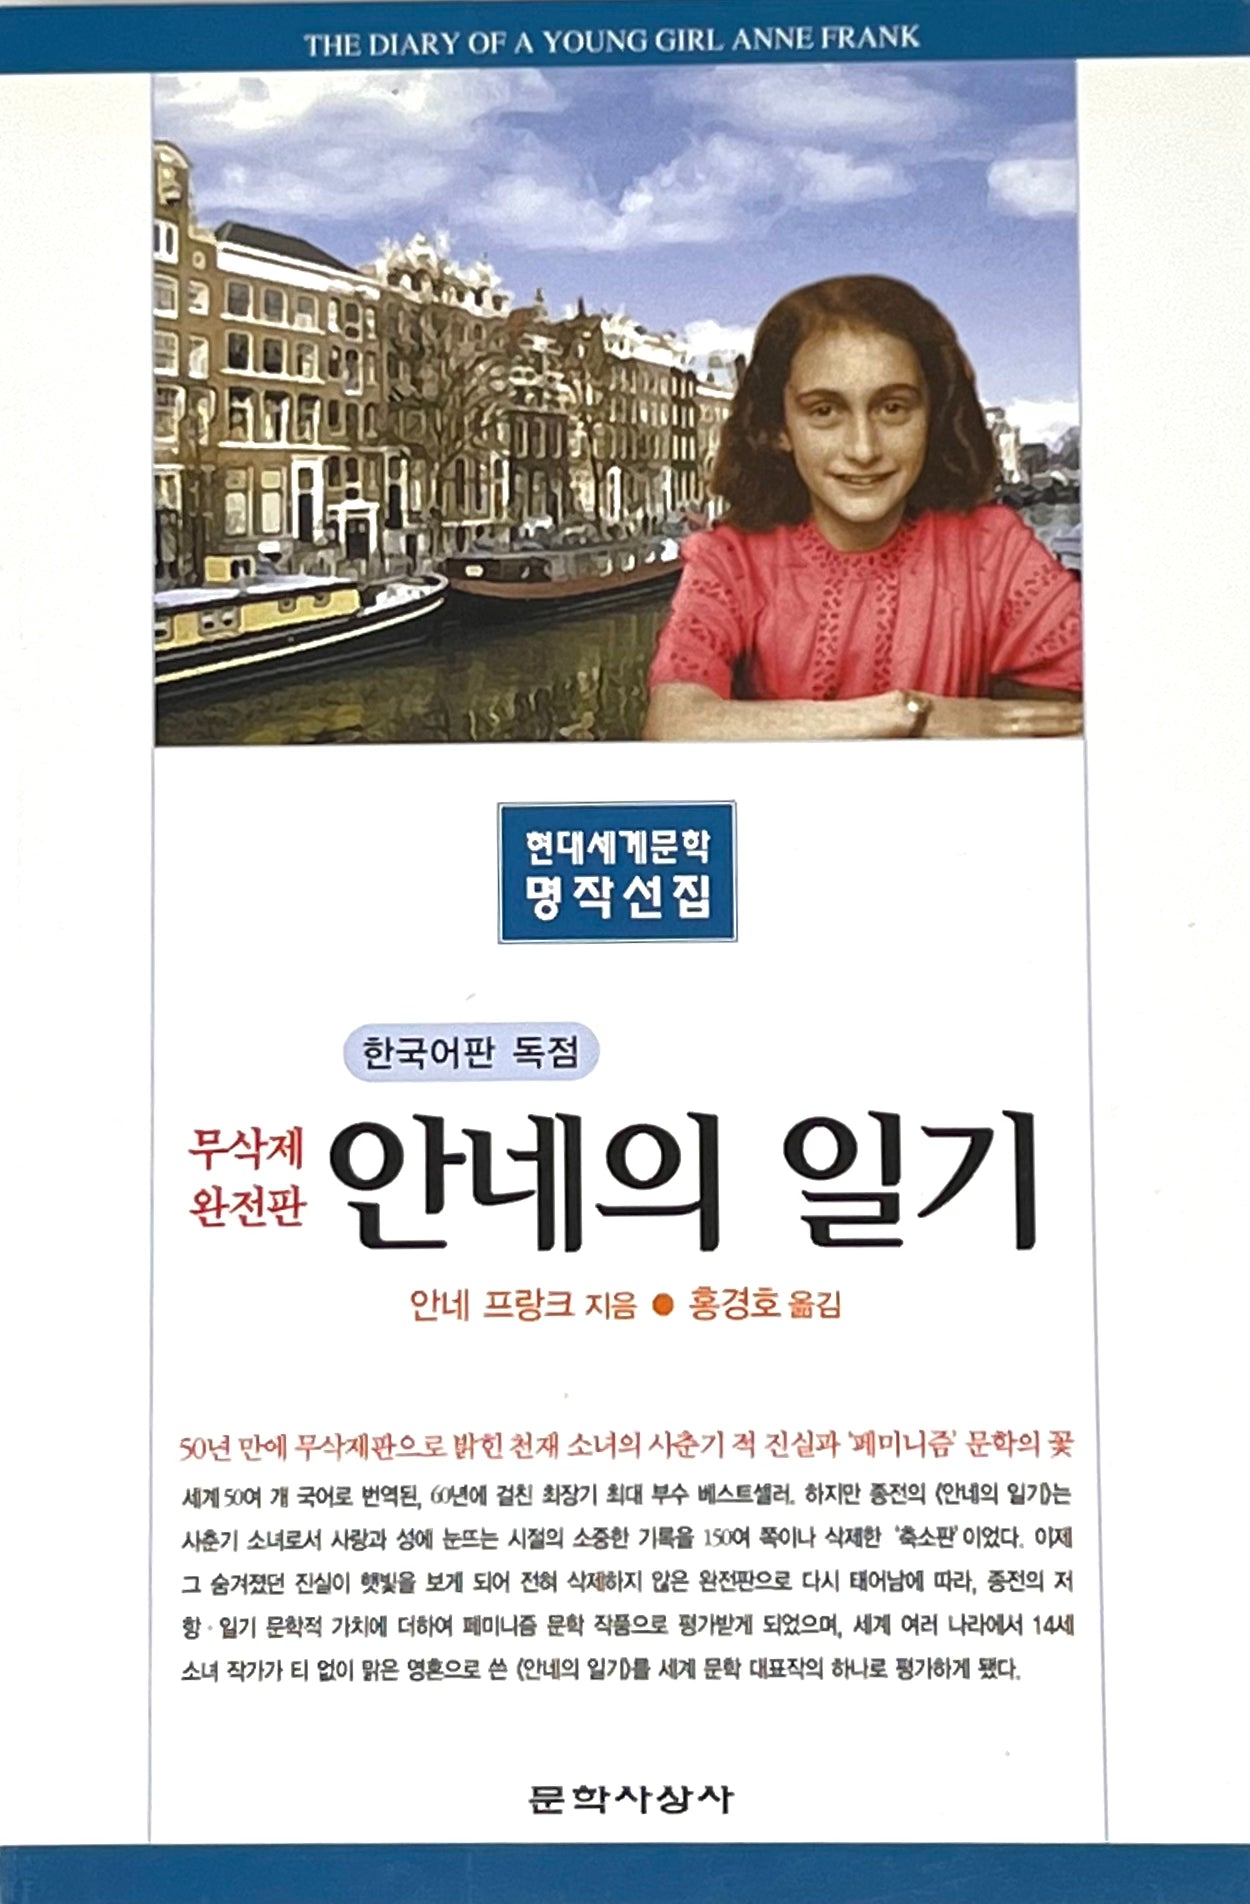  Anne Frank: The Diary of a Young Girl By Anne Frank: Frank, Anne